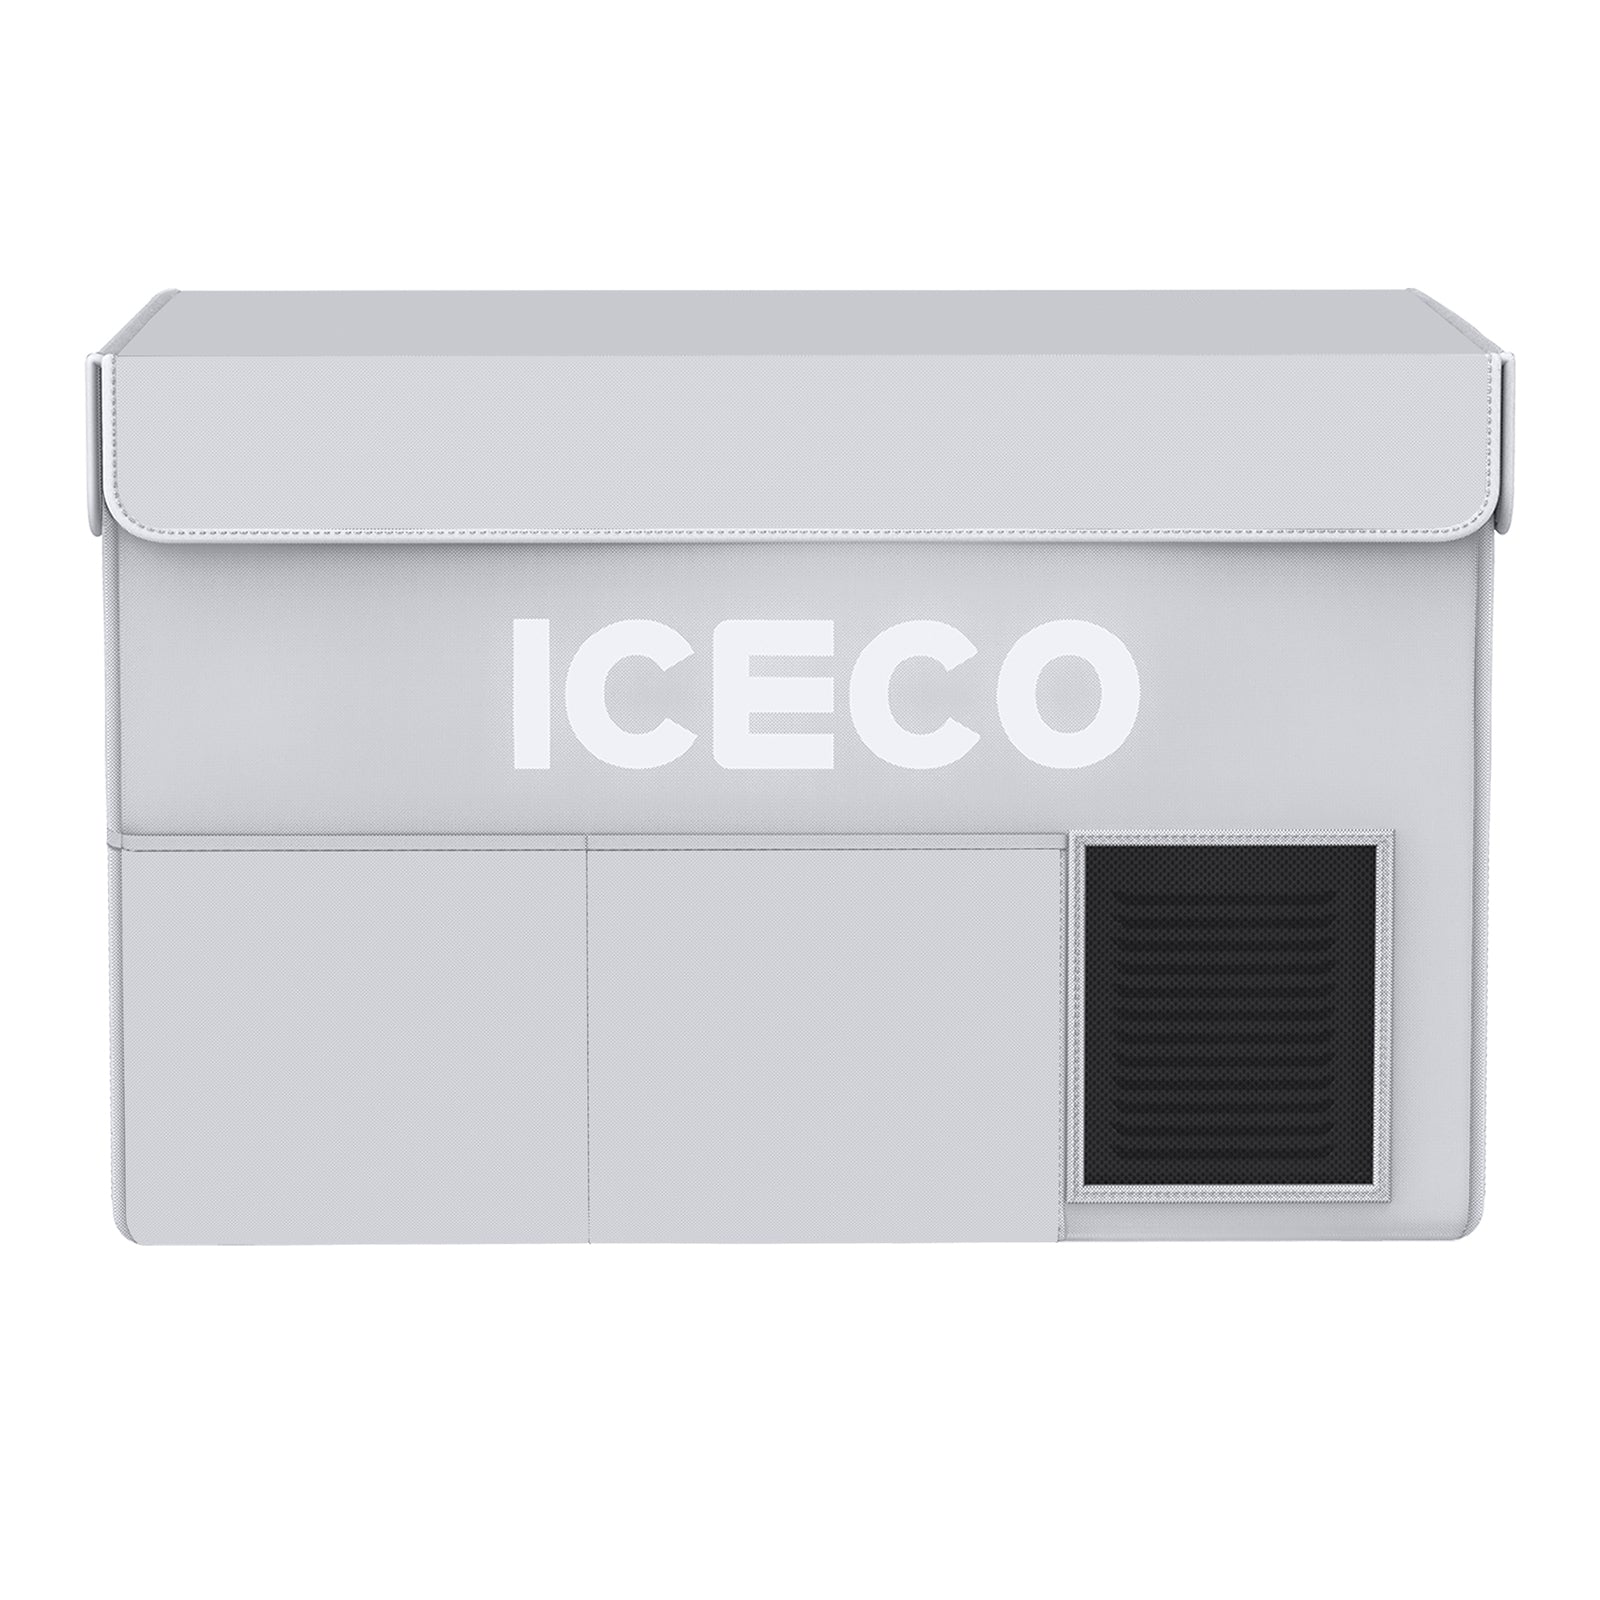 ICECO Upgraded Insulated Cover For VL60ProS-Insulated Cover-www.icecofreezer.com